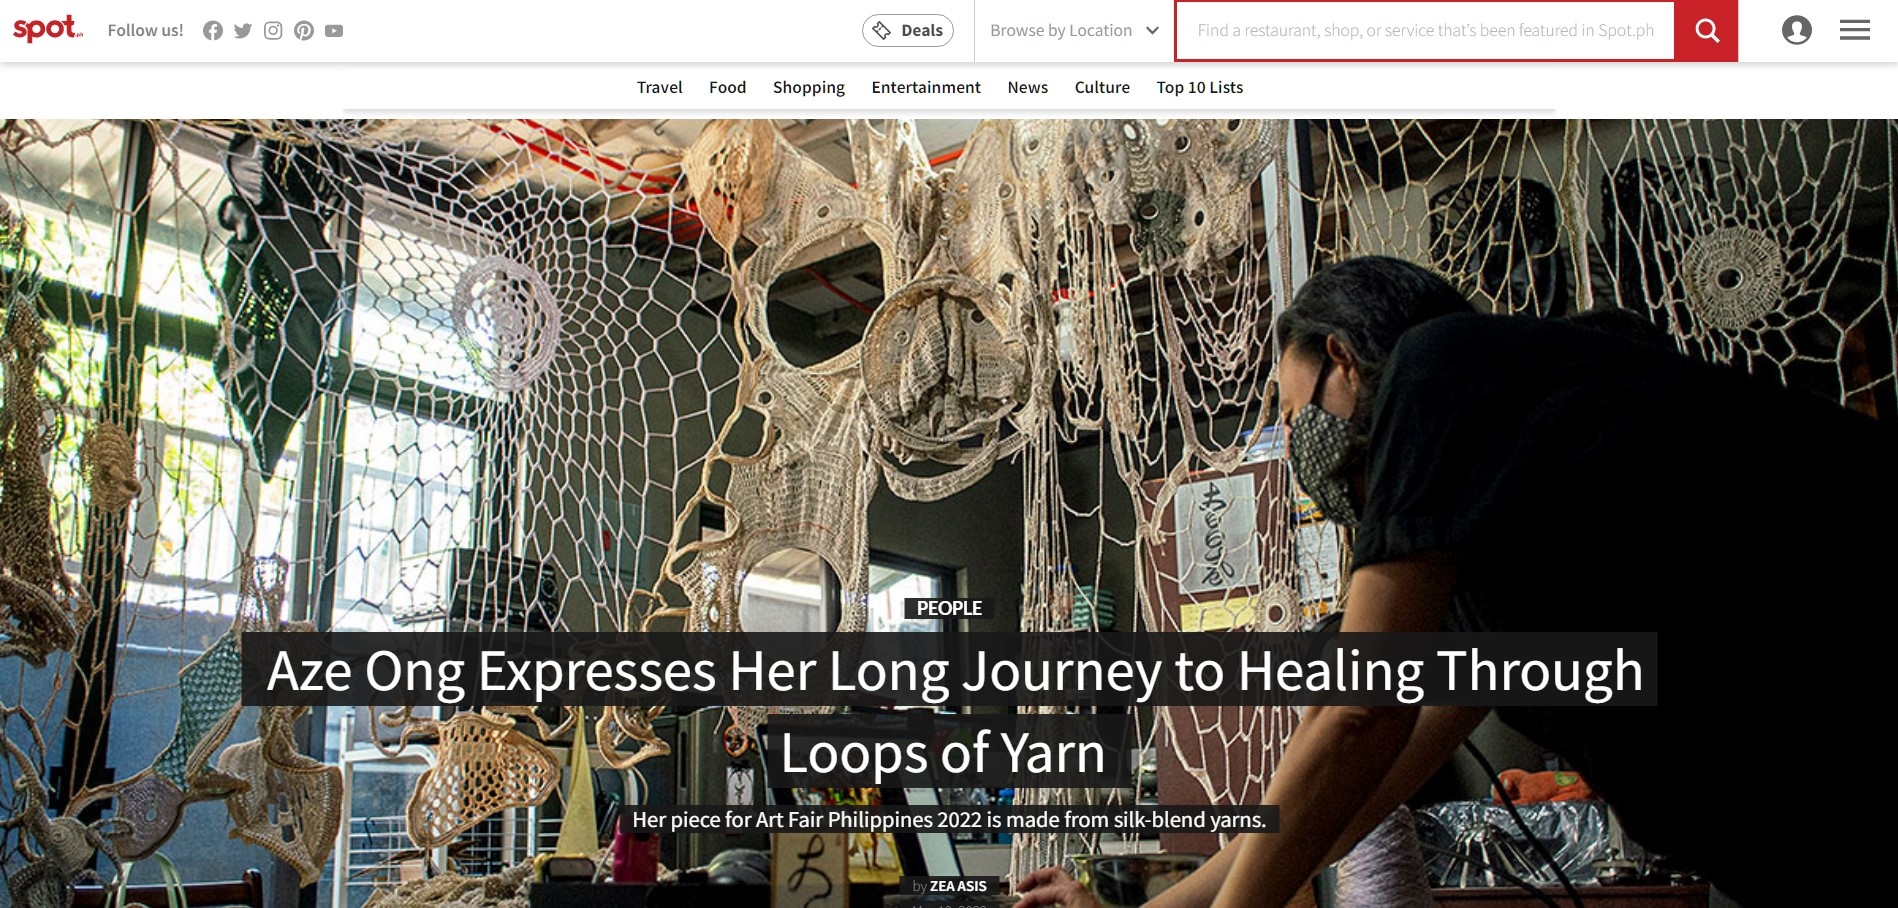 Tearsheets - Spot.PH: Aze Ong Expresses Her Long Journey to Healing Through Loops of Yarn